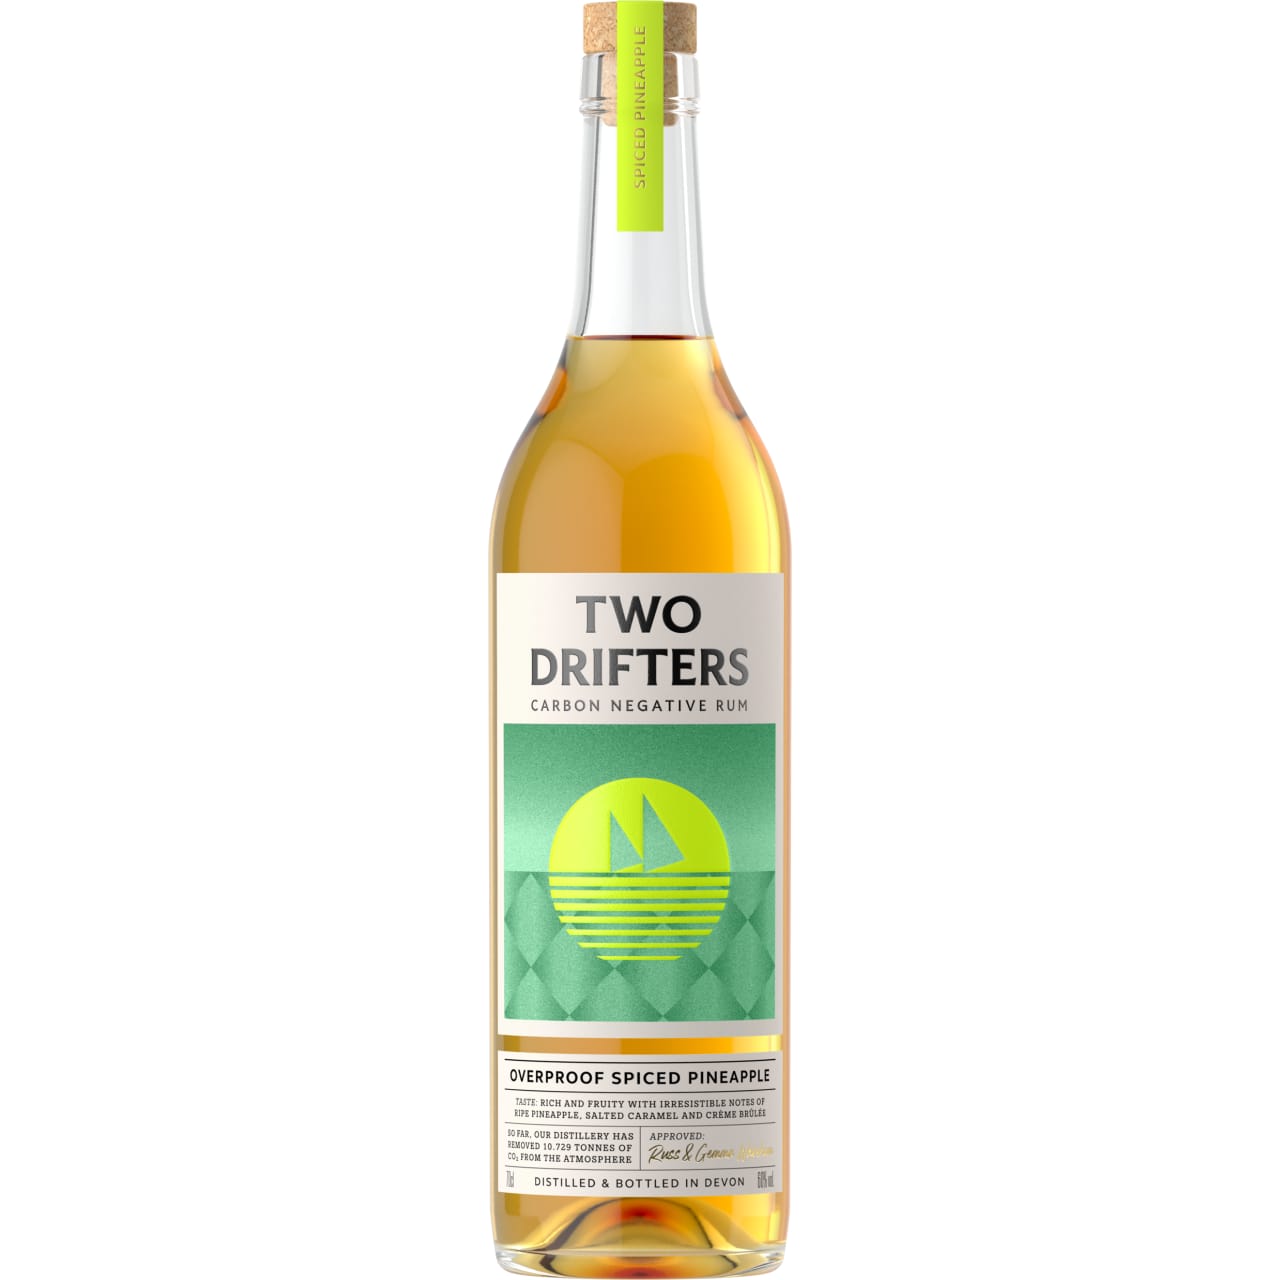 Product Image - Two Drifters Overproof Spiced Pineapple Rum